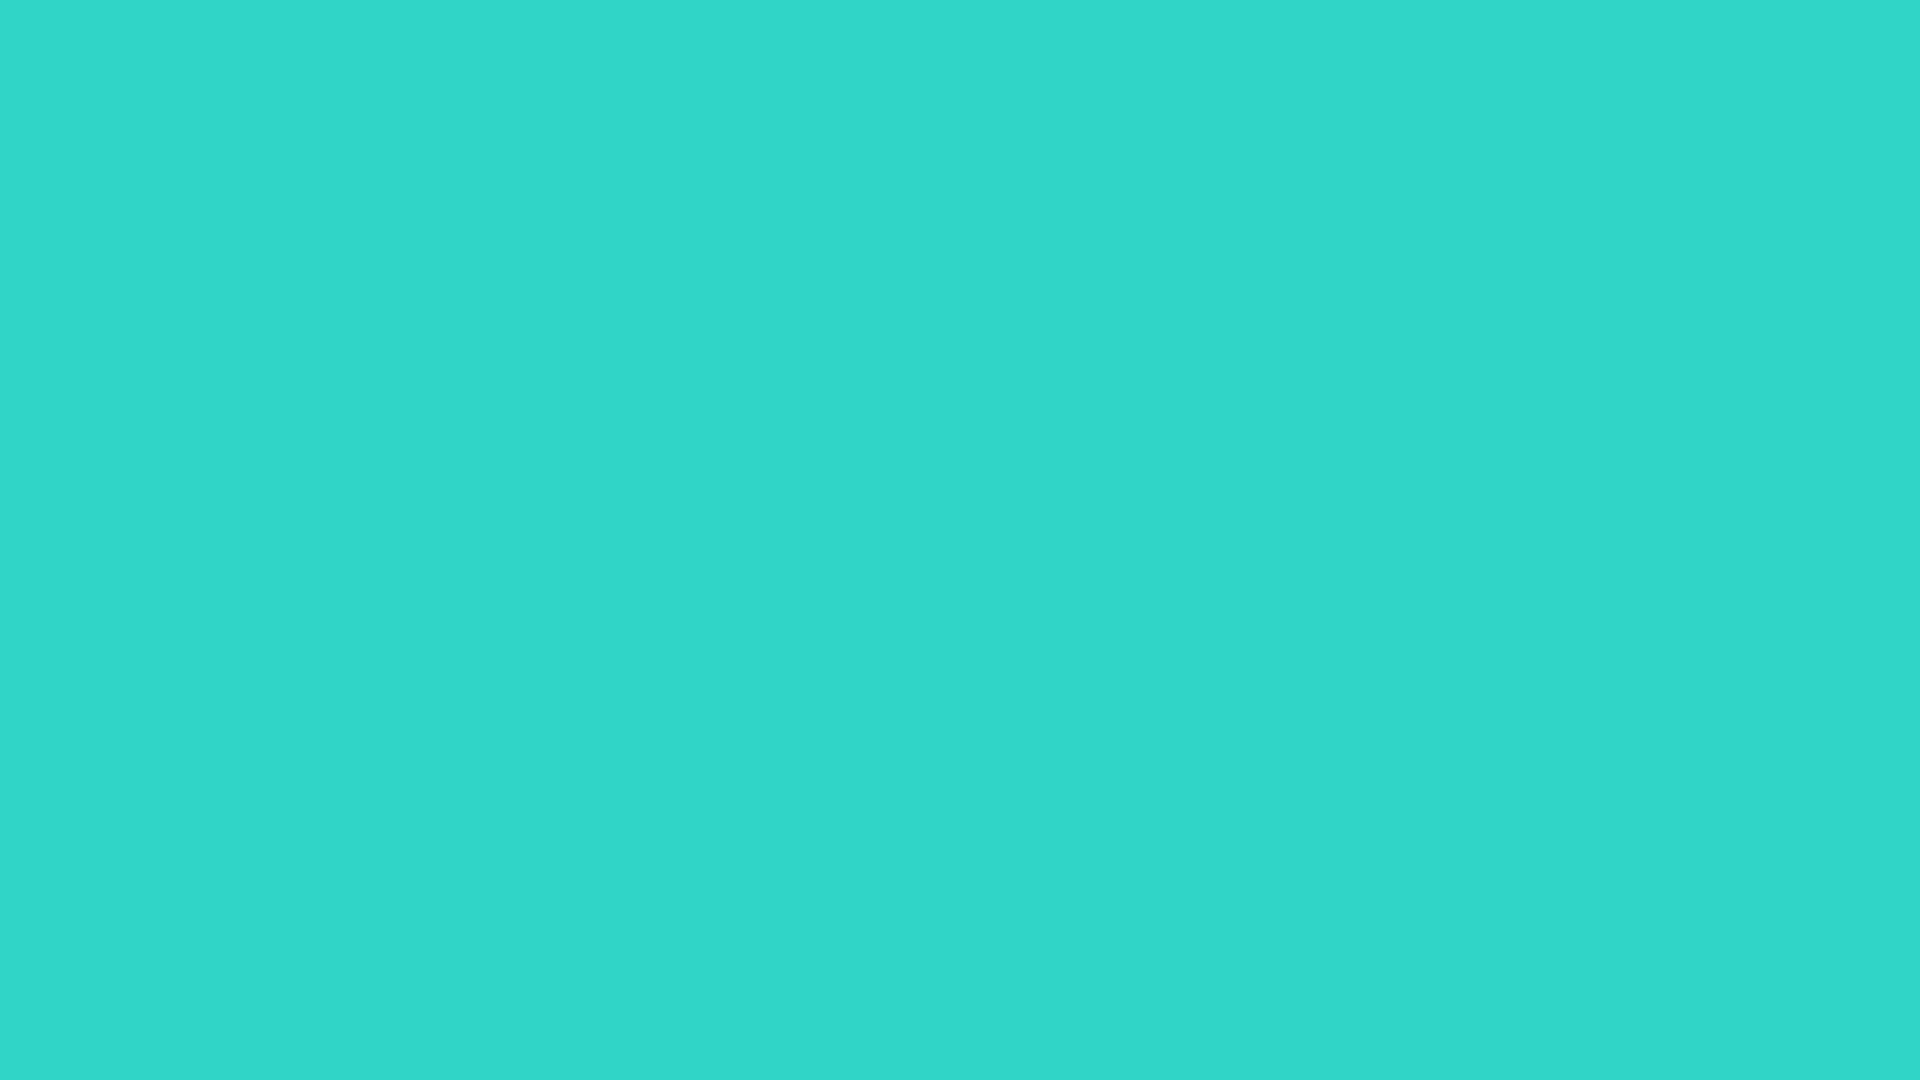 Turquoise Wallpaper High Definition Quality Widescreen